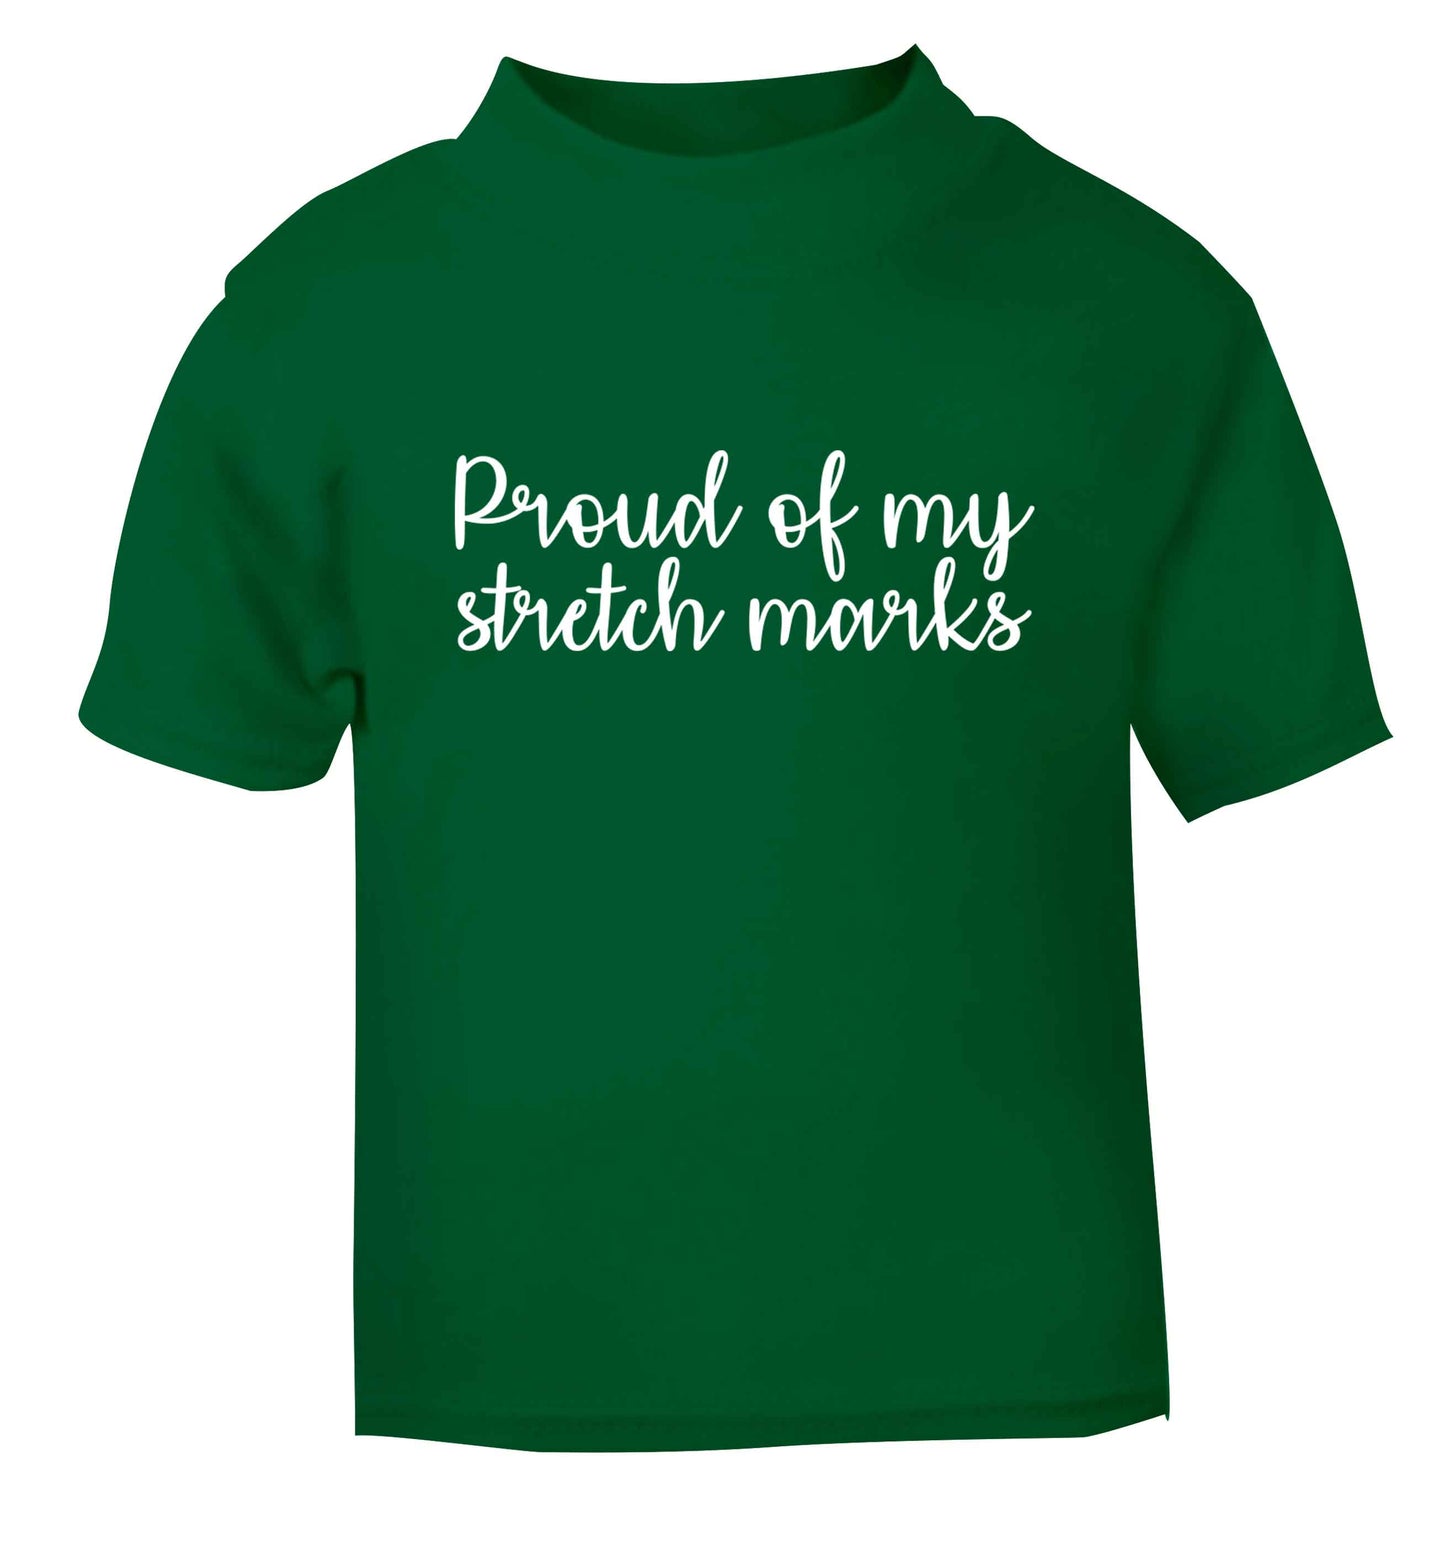 Proud of my stretch marks green baby toddler Tshirt 2 Years